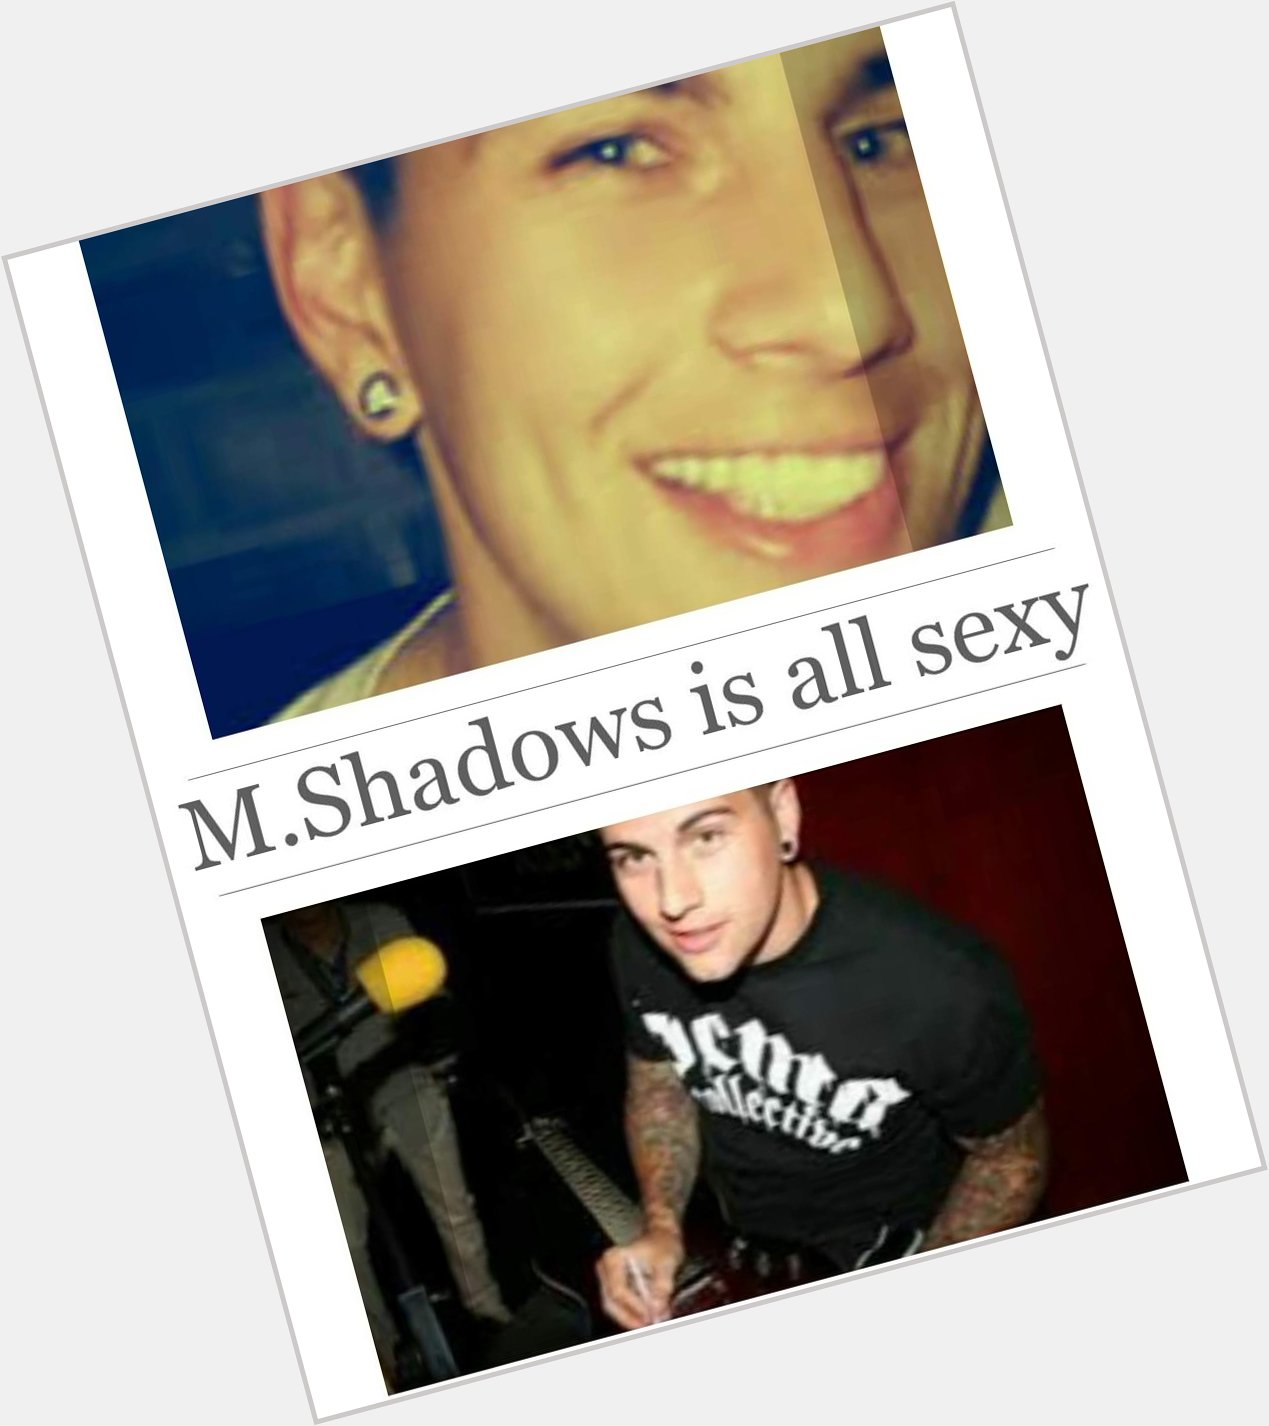 Happy bday to the sexy frontman of AvengedSevenfold.  
M.Shadows  ... 